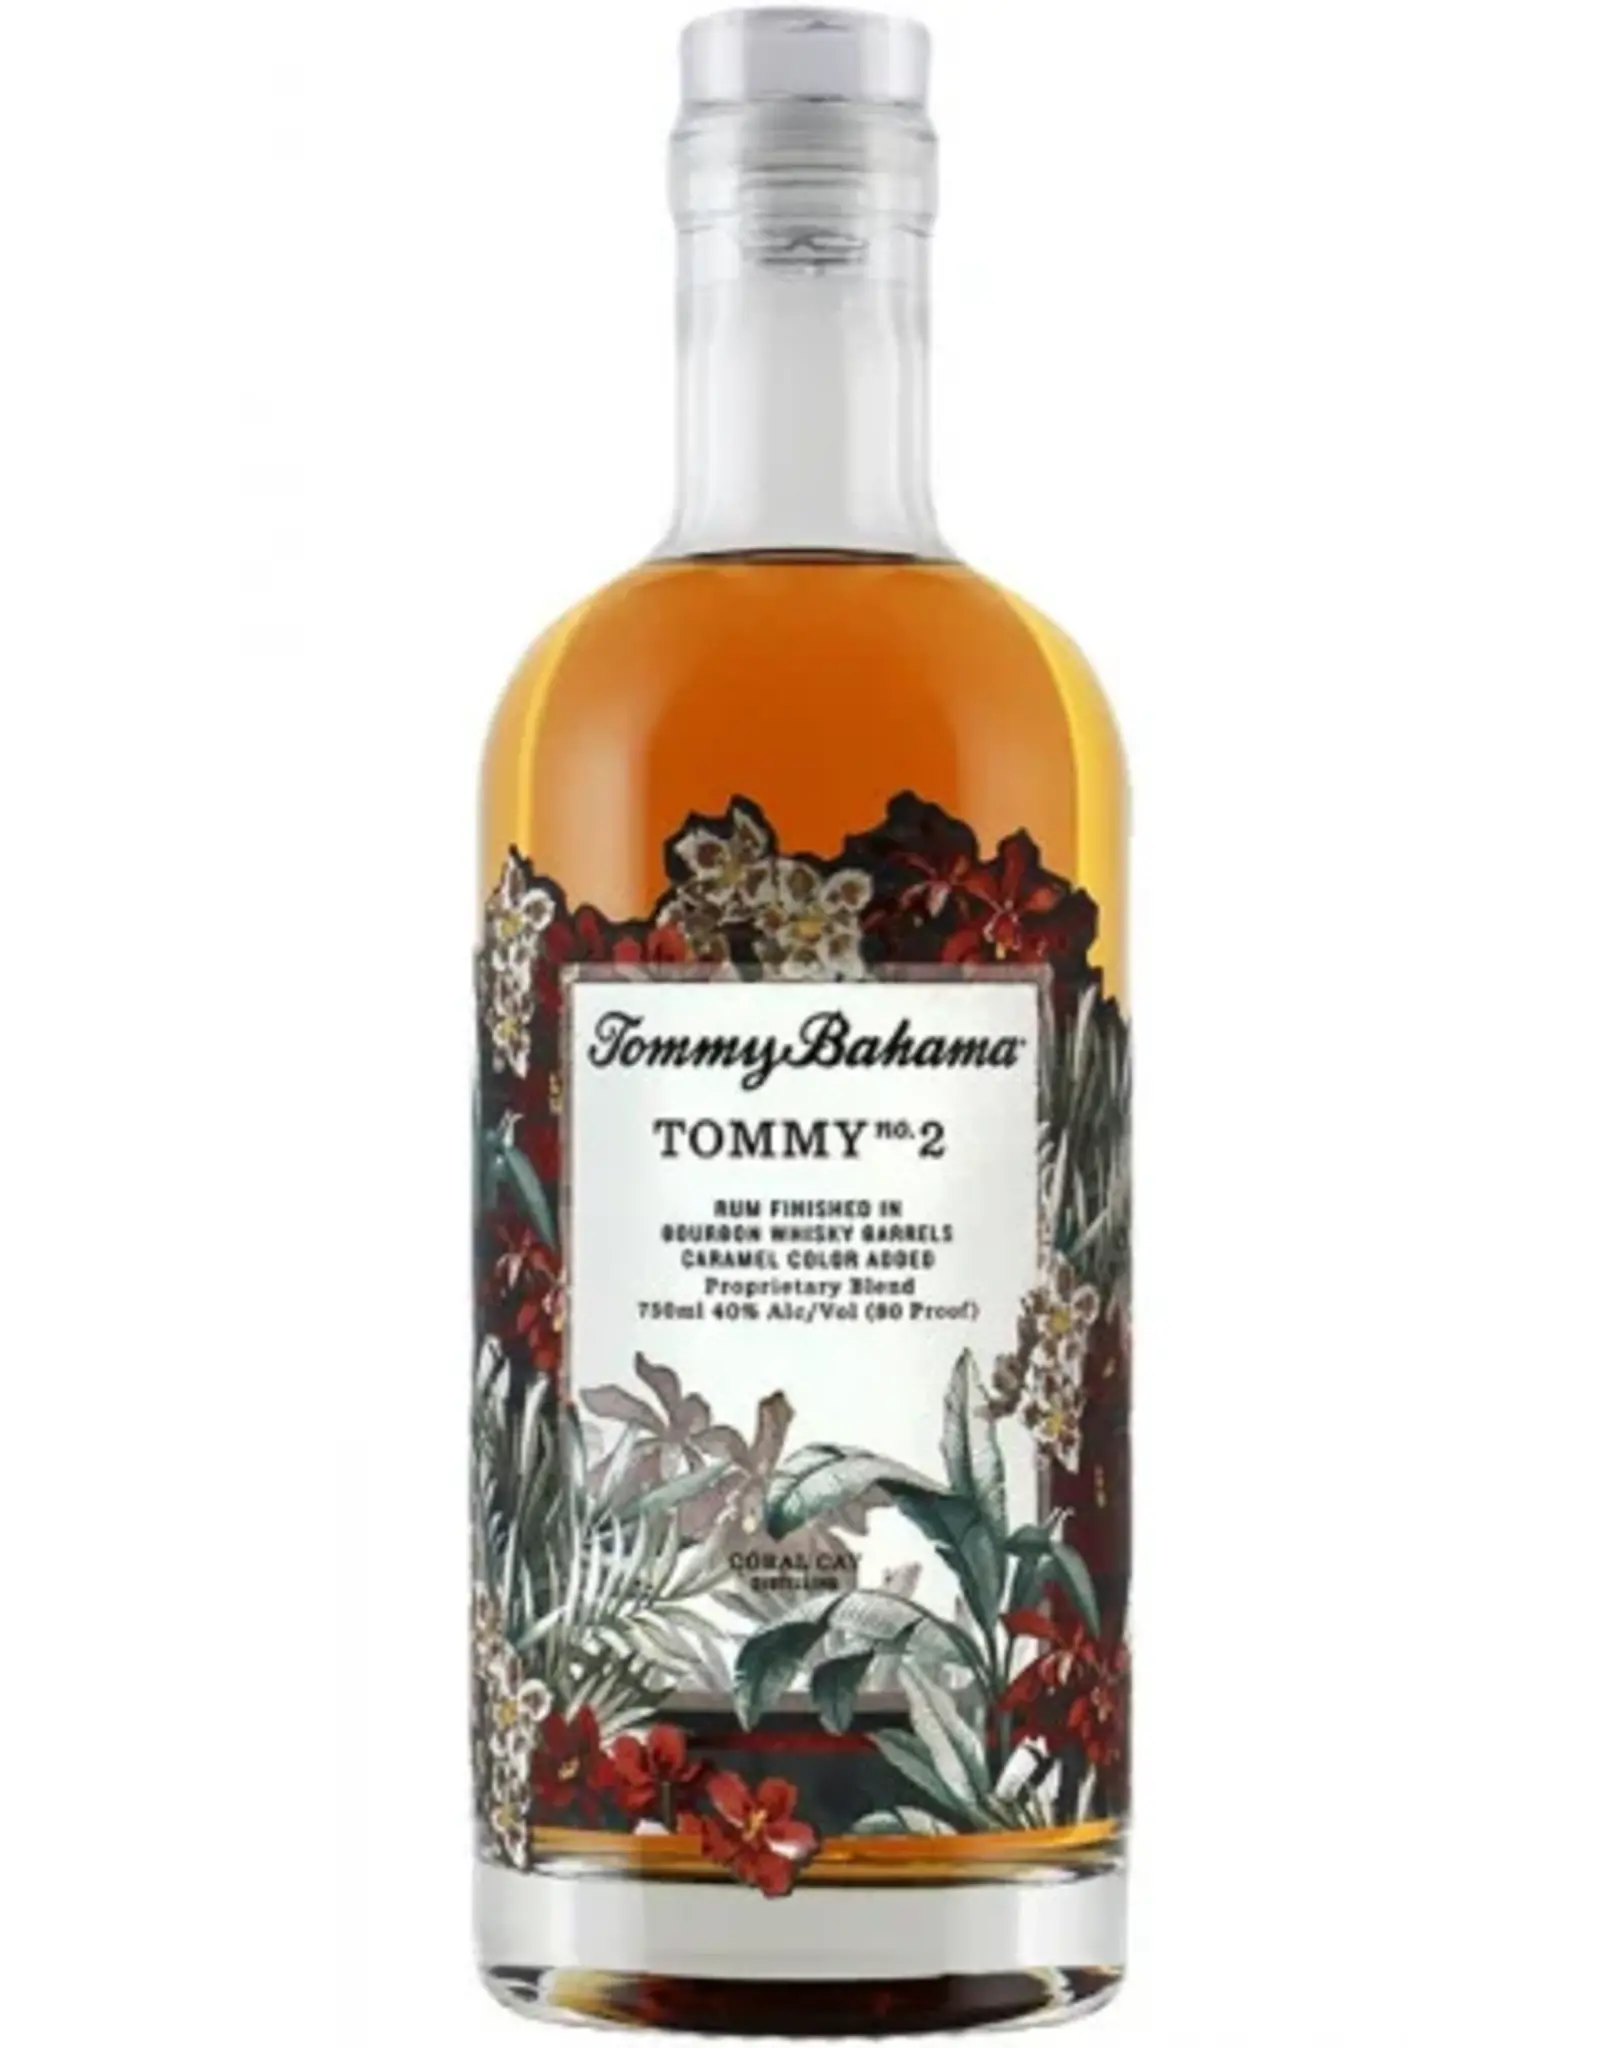 Tommy Bahama RUM no 2